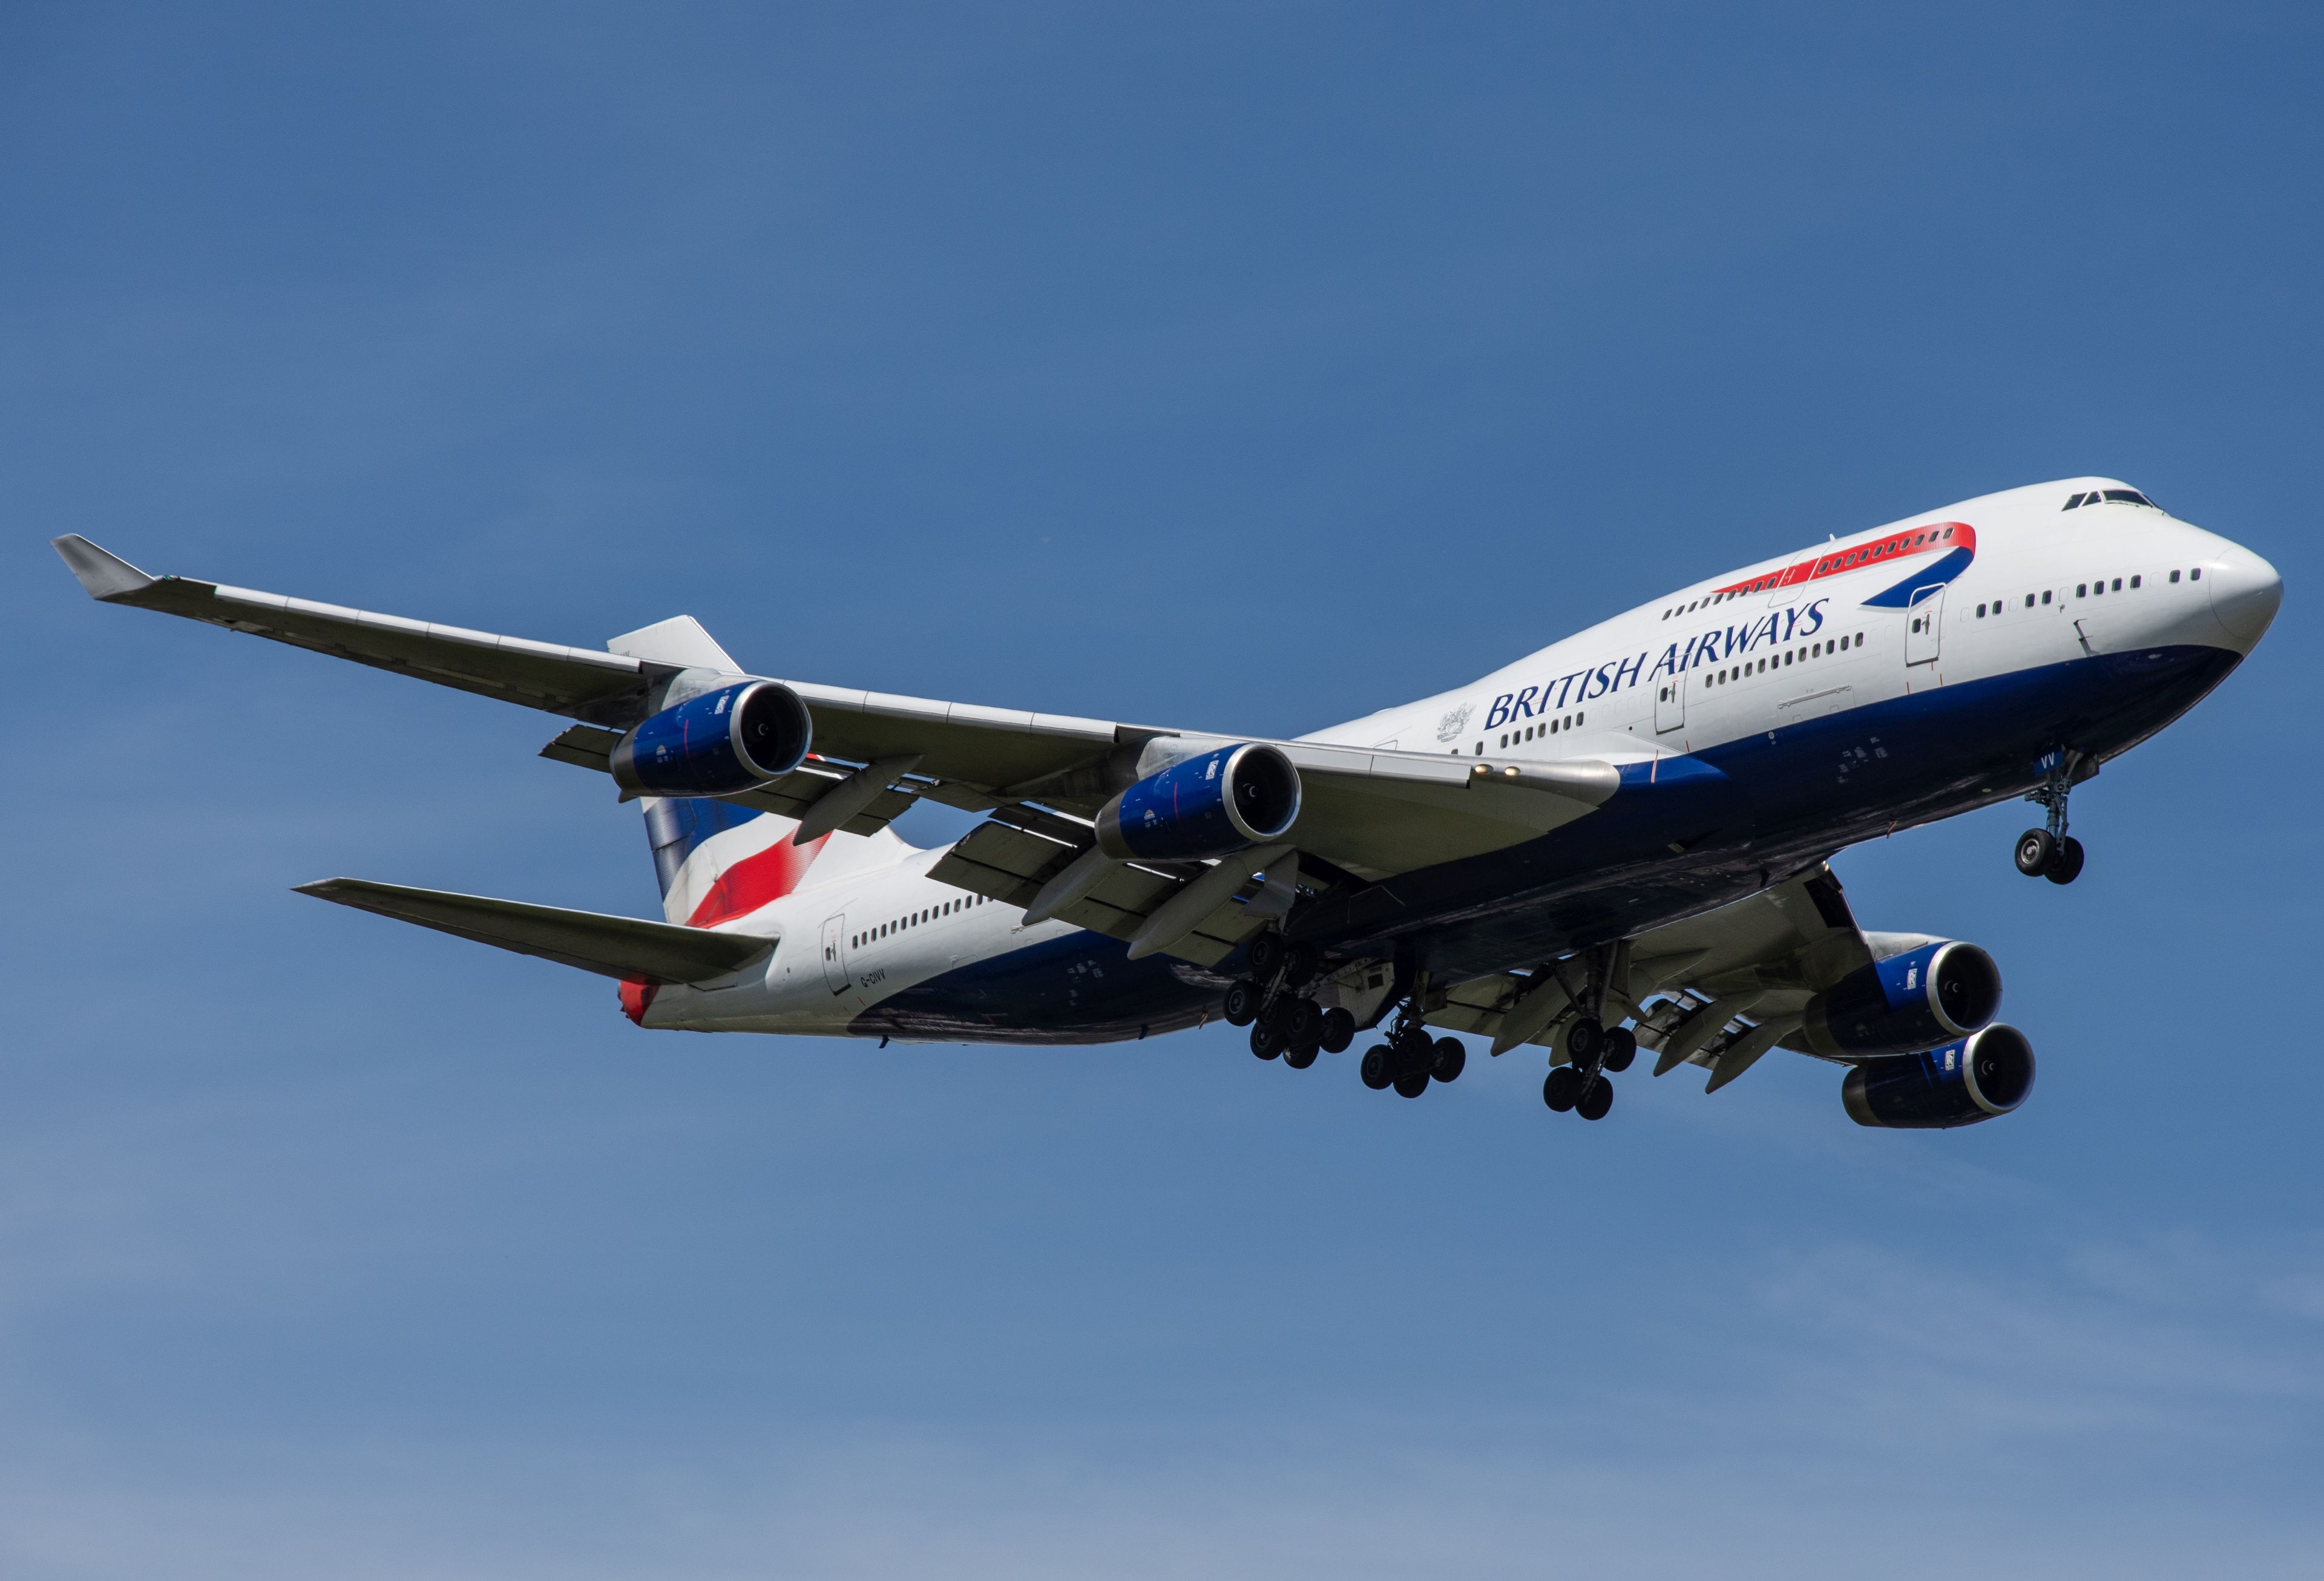 G-CIVV/GCIVV Withdrawn from use Boeing 747 Airframe Information - AVSpotters.com